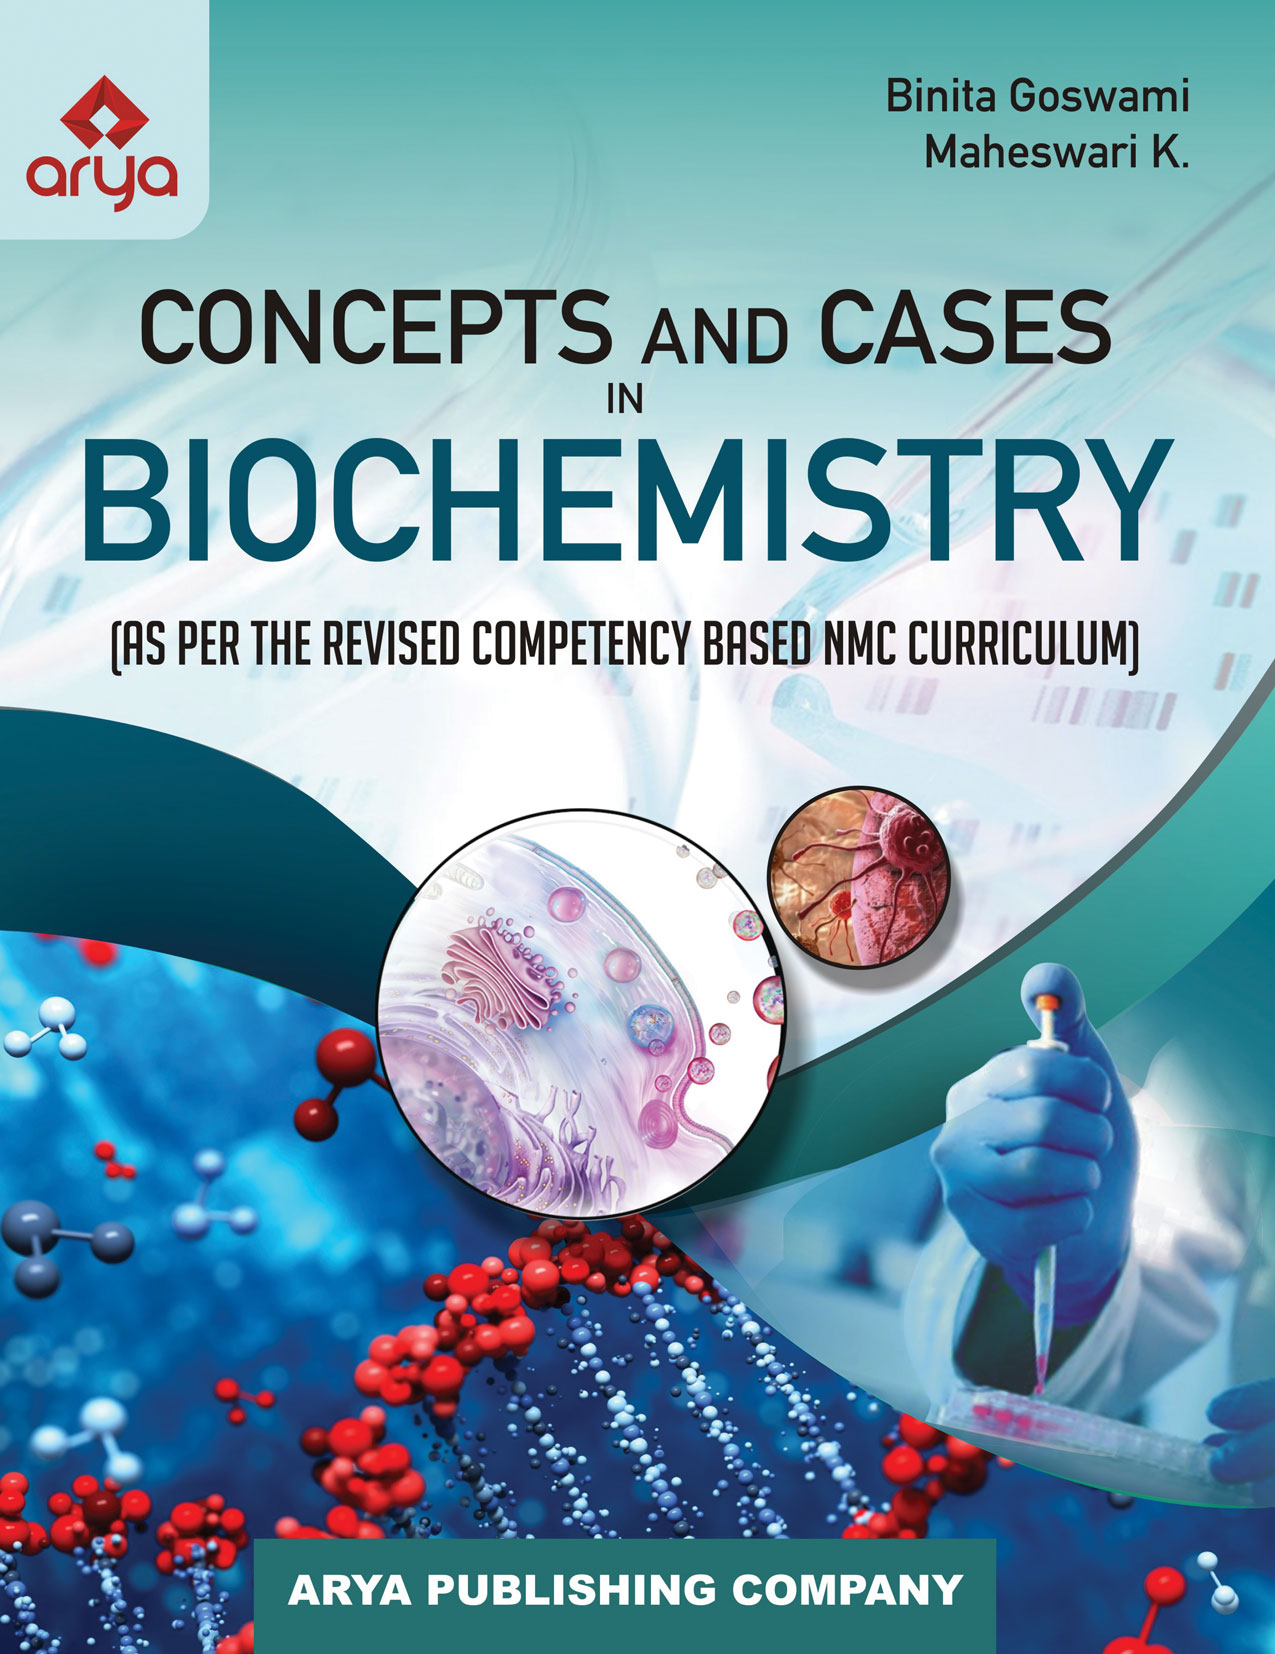 Concepts and Cases in Biochemistry